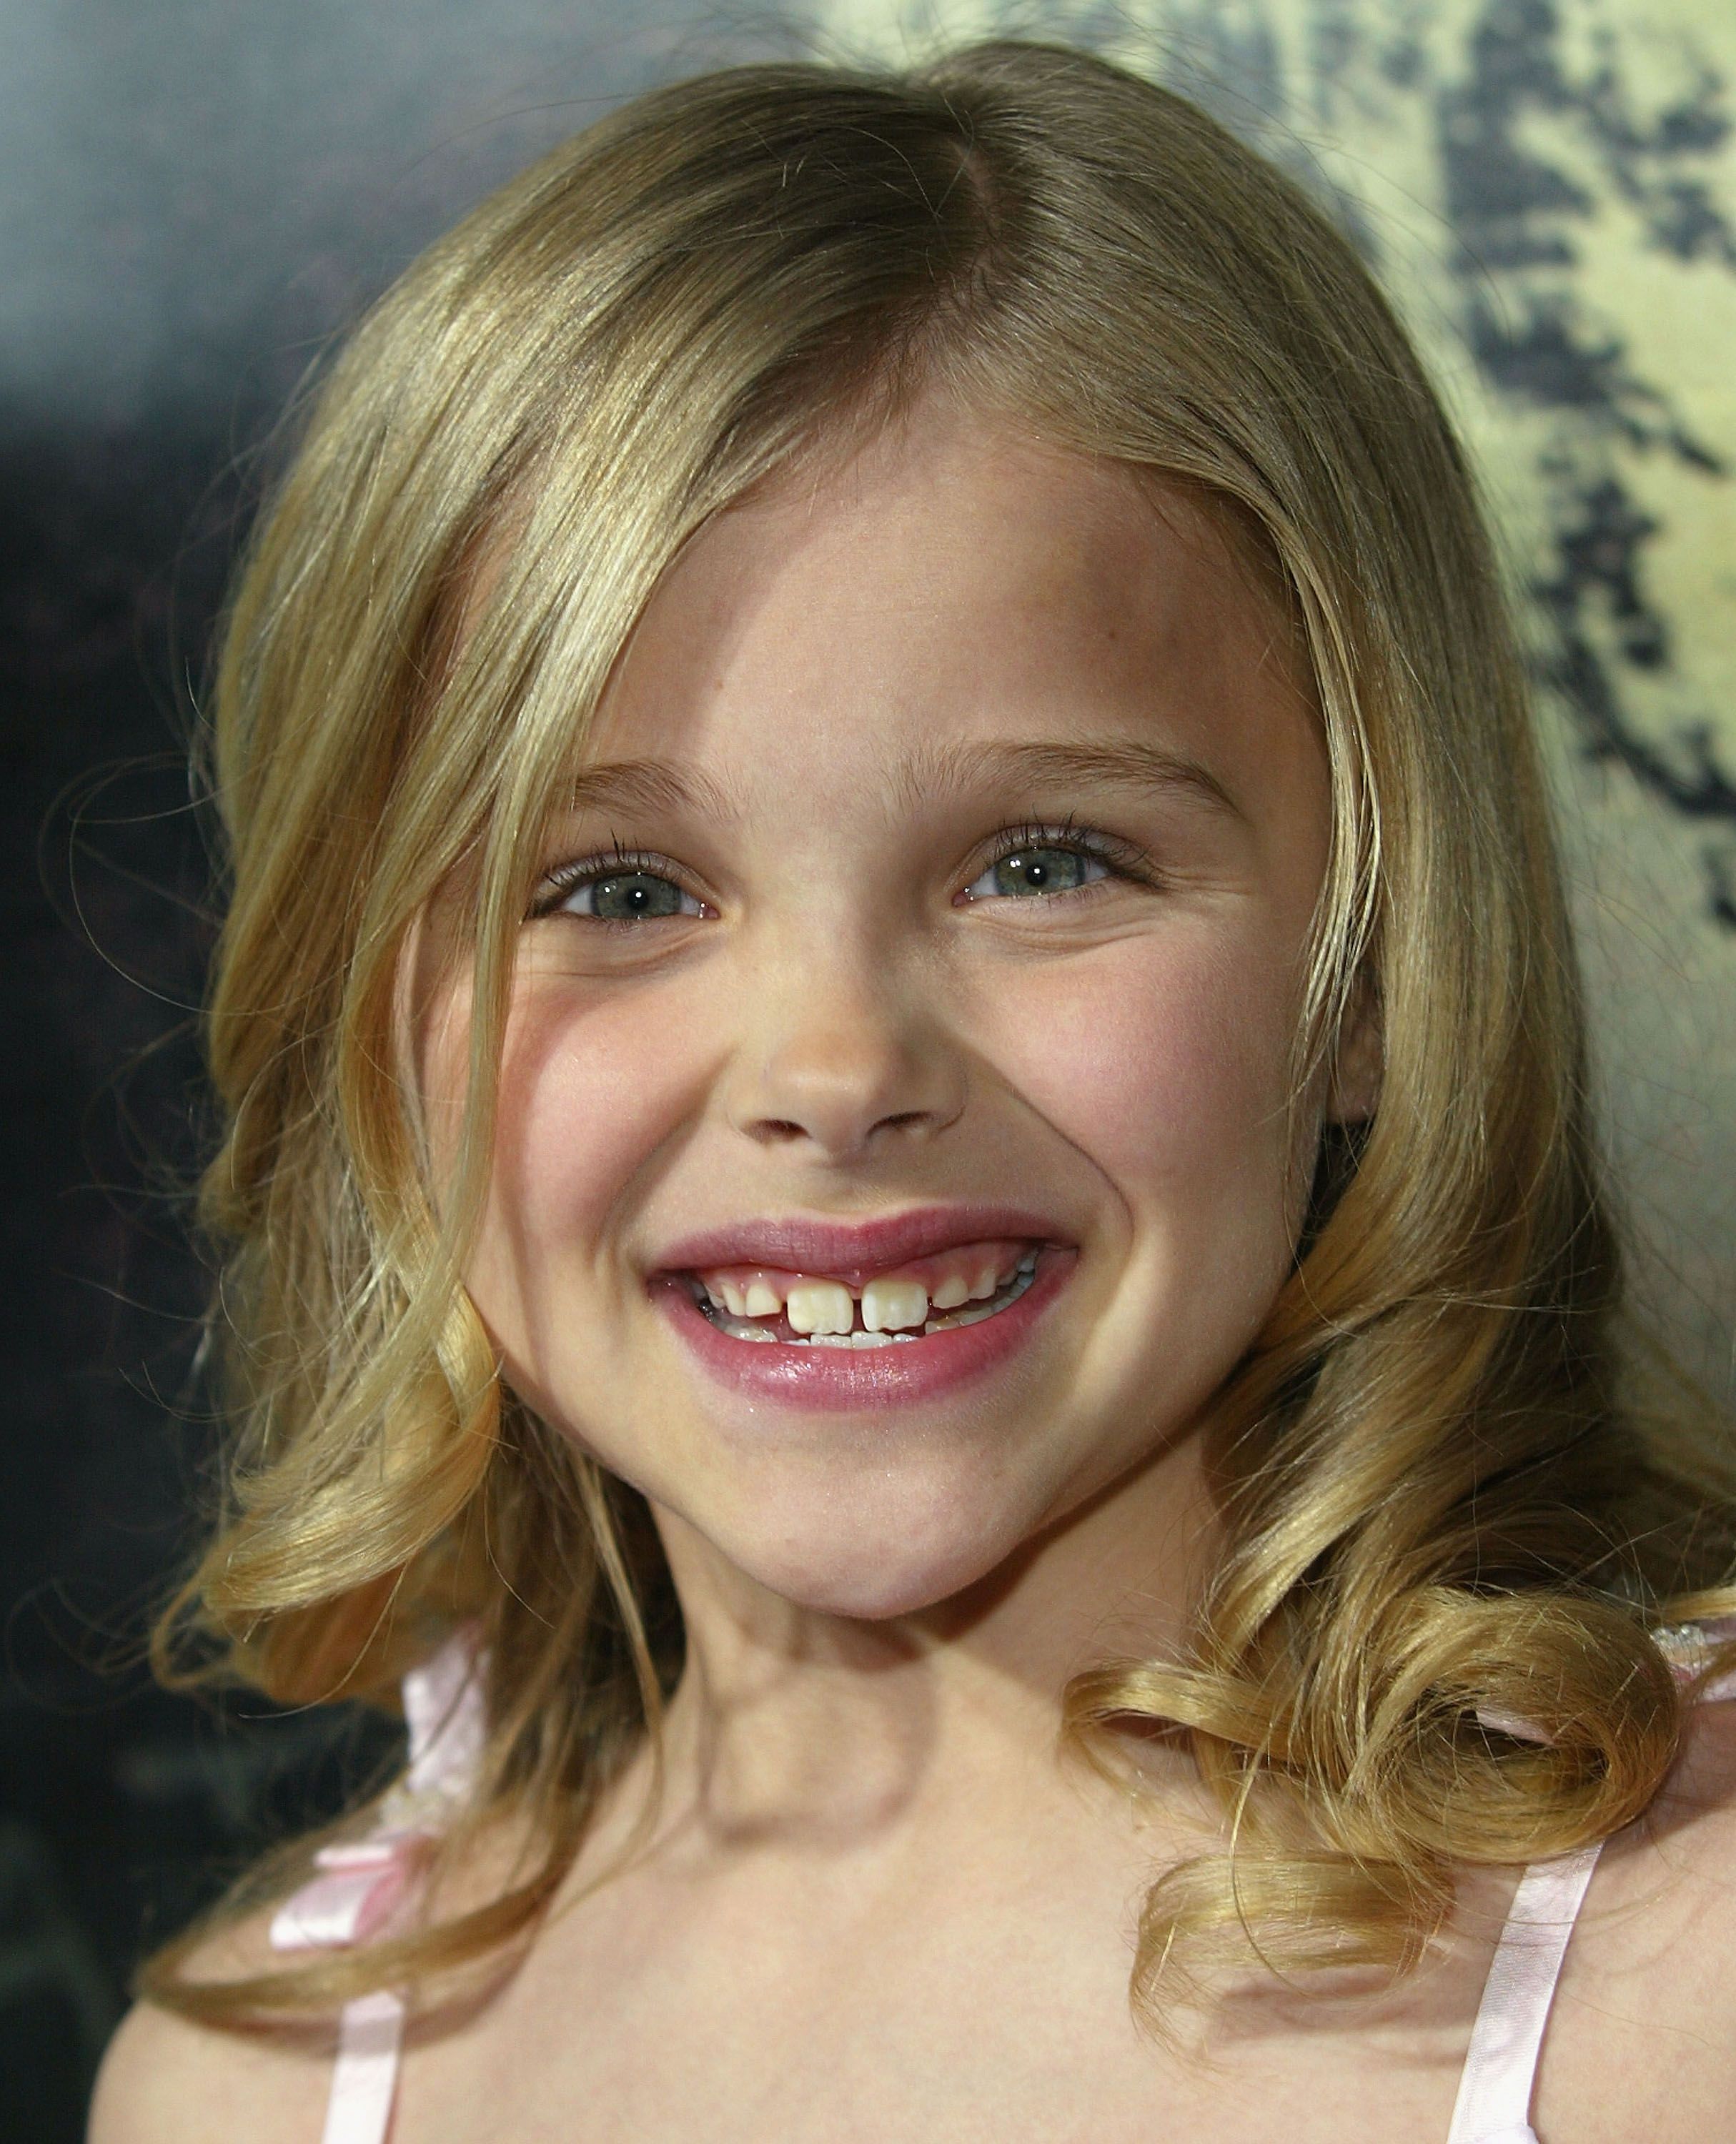 11-year-old Chloë Grace Moretz at the premiere of "The Amityville Horror" in 2005 in Los Angeles, California Source: Getty Images